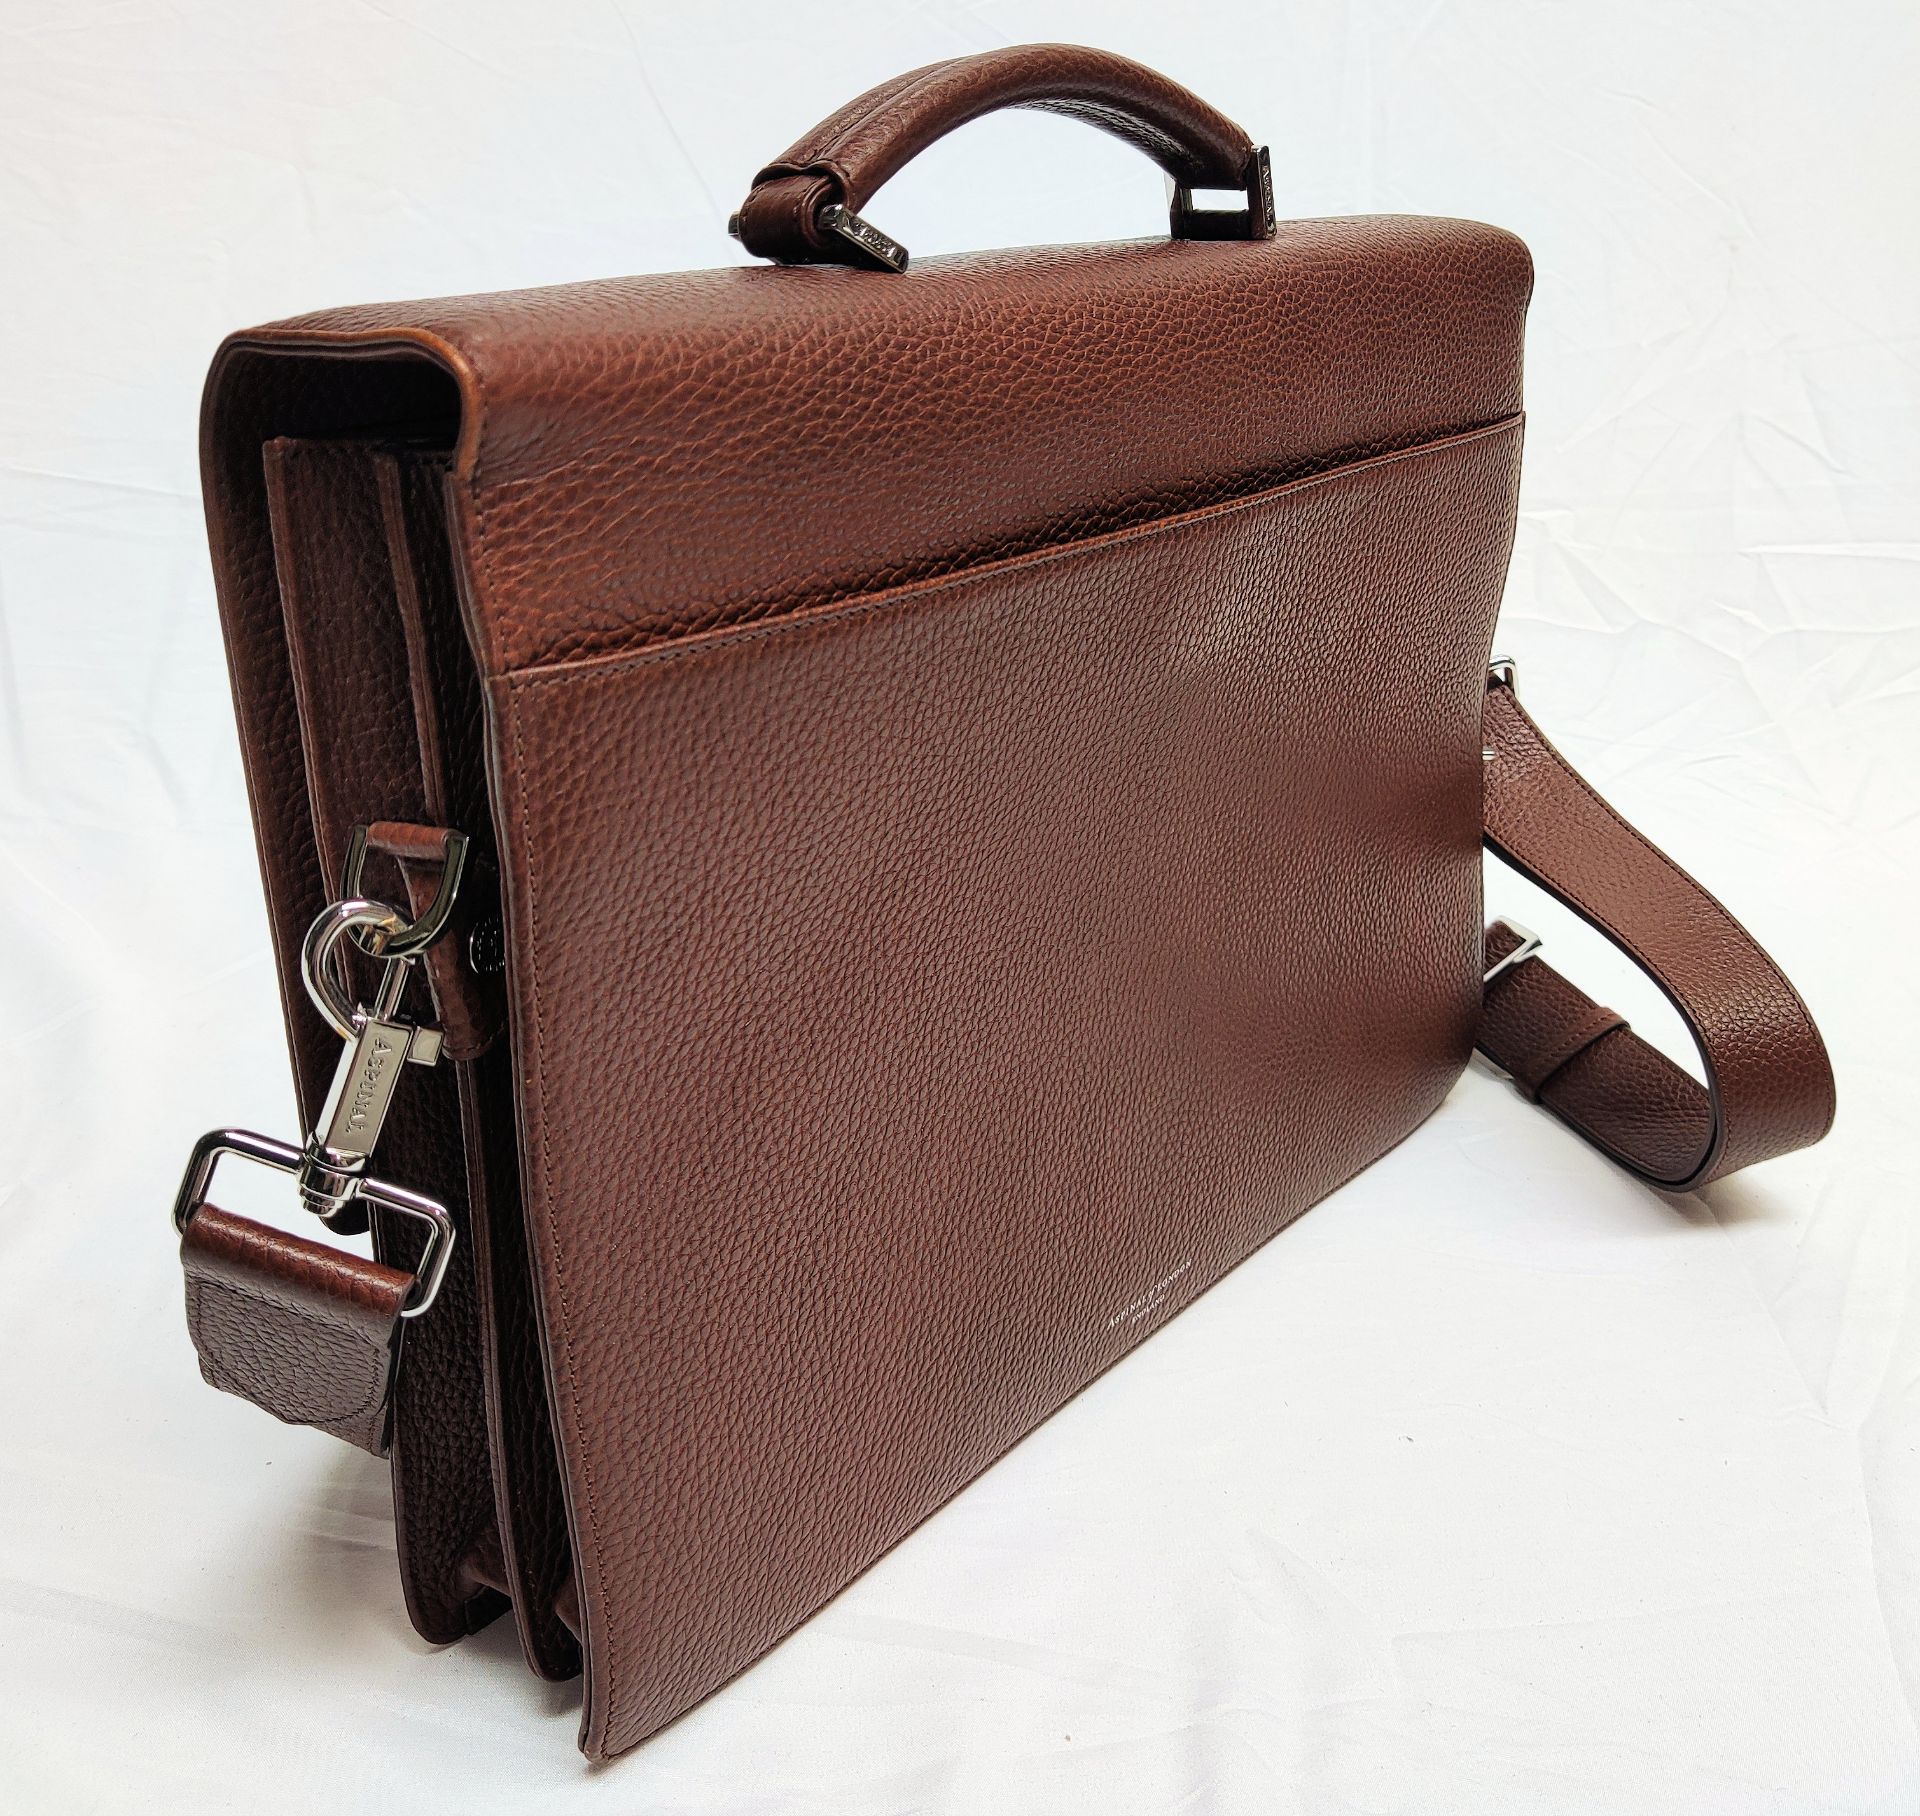 1 x ASPINAL OF LONDON City Laptop Briefcase - Tobacco Pebble - Original RRP £595 - Ref: 7004590/ - Image 12 of 13